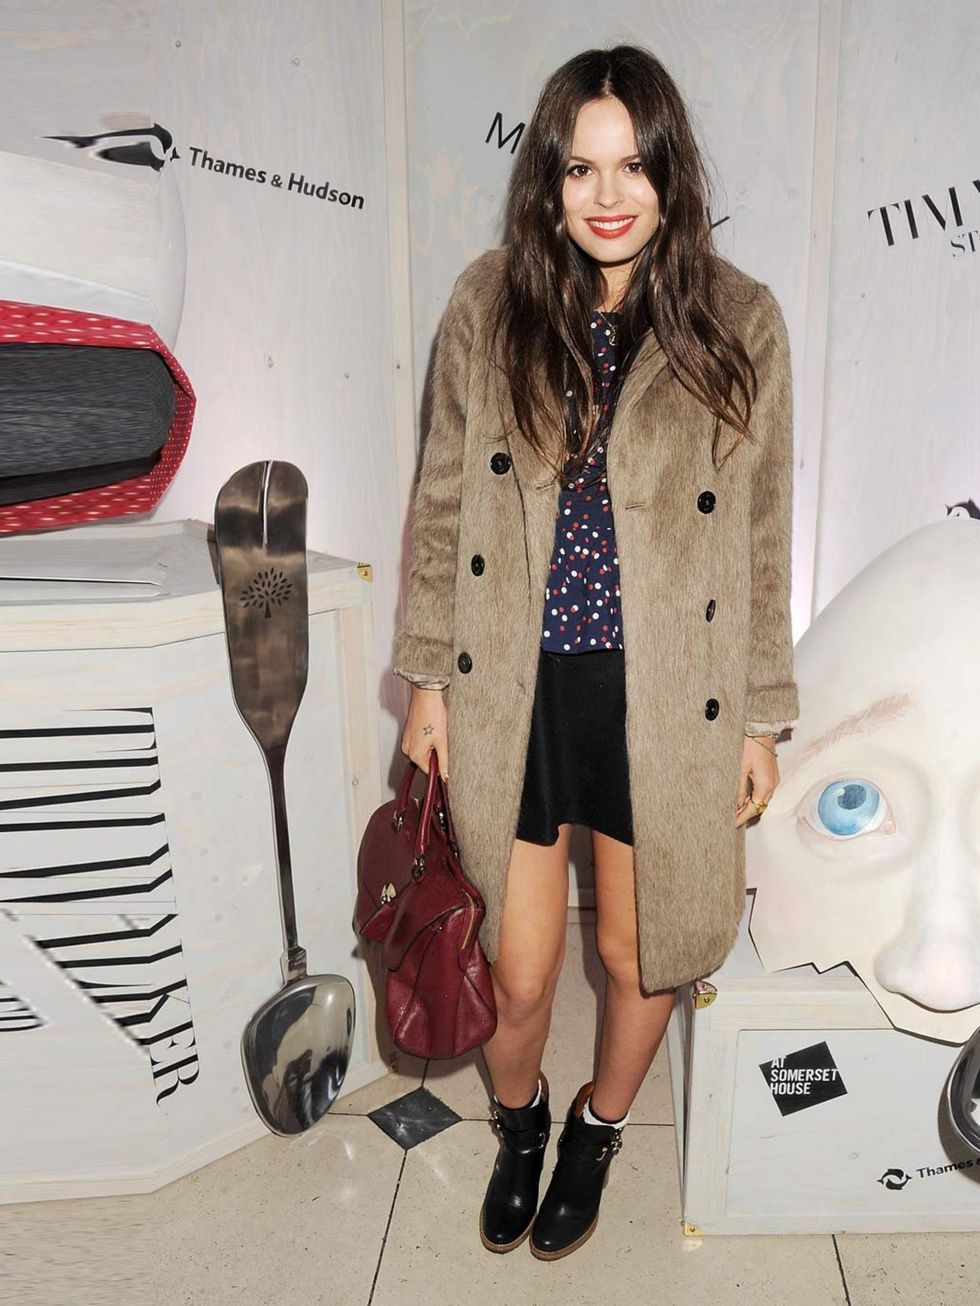 <p>Atlanta De Cadanet matches a Boyfriend Coat in truffle, Dorset High Heel Booties in black, with a Del Rey bag in black forest from the Mulberry AW12 collection at the Tim Walker Story Teller Exhibition opening party.</p>